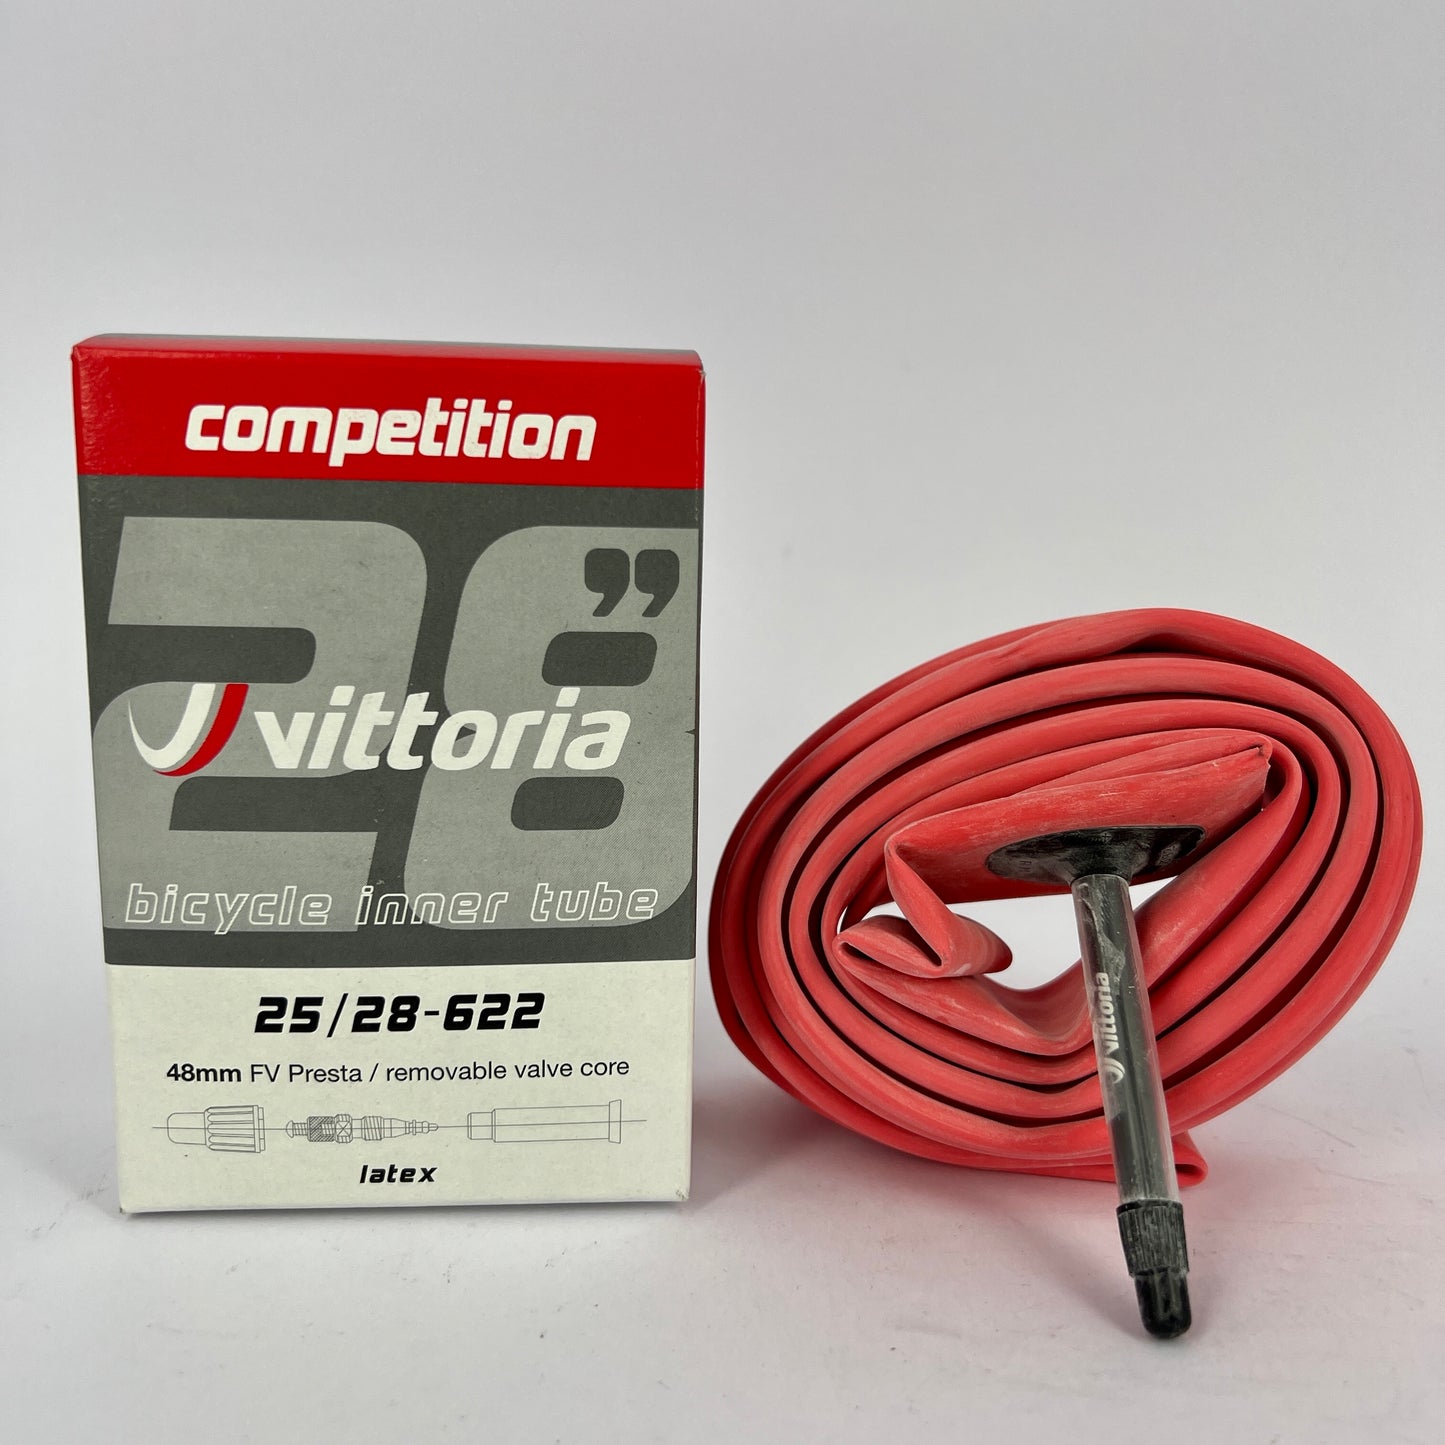 Vittoria Competition Bicycle Inner Tube